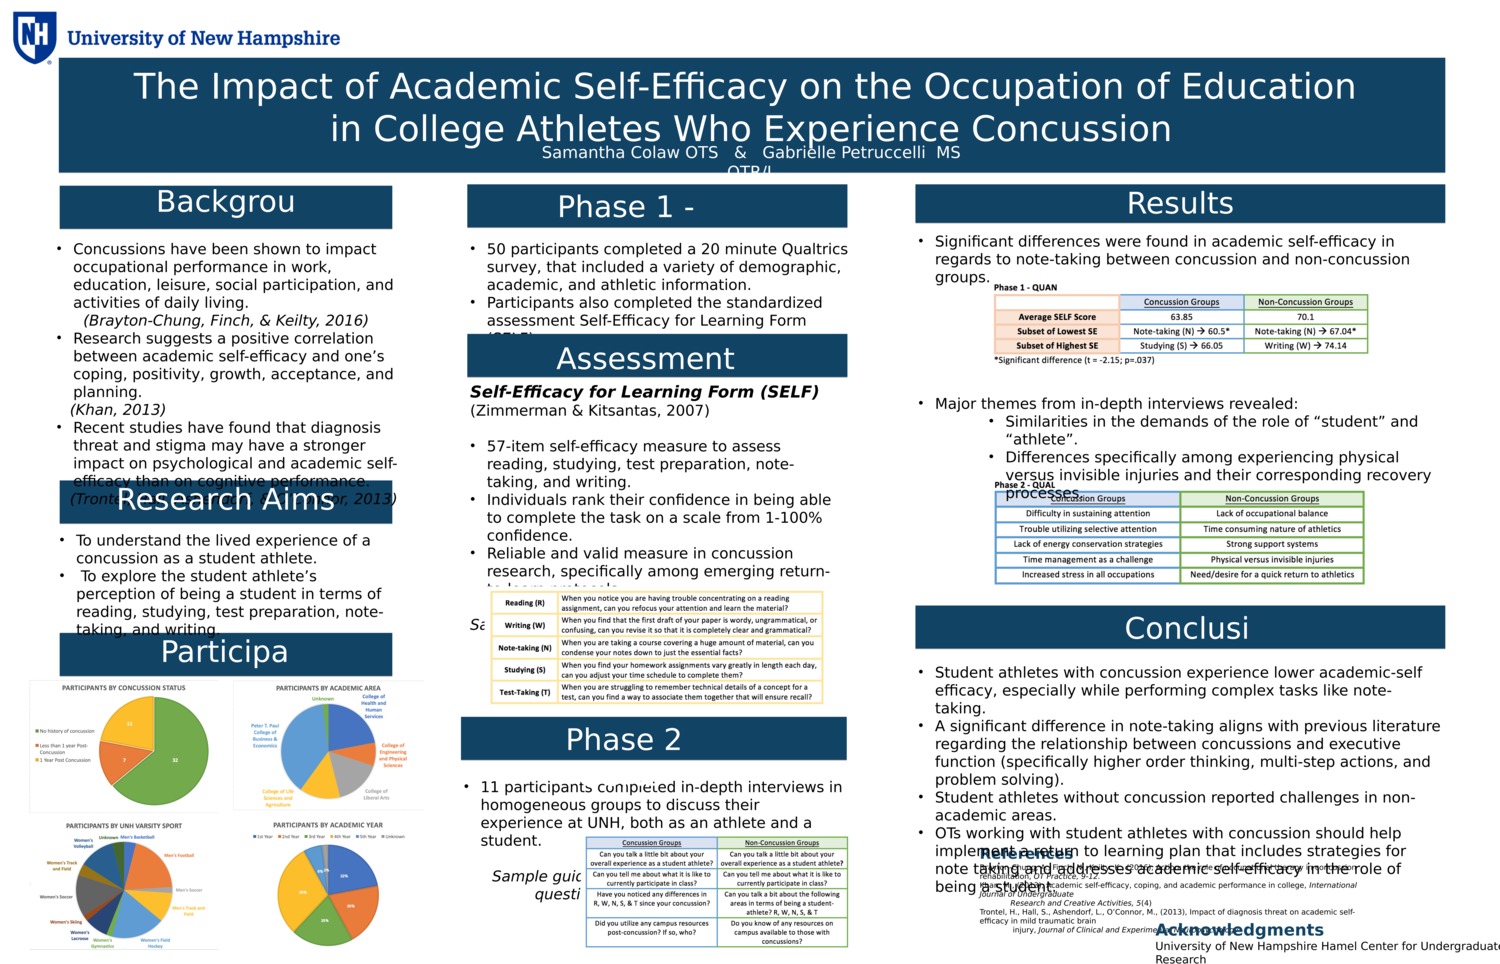 The Impact Of Academic Self-Efficacy On The Occupation Of Education  In College Athletes Who Experience Concussion by sec2001